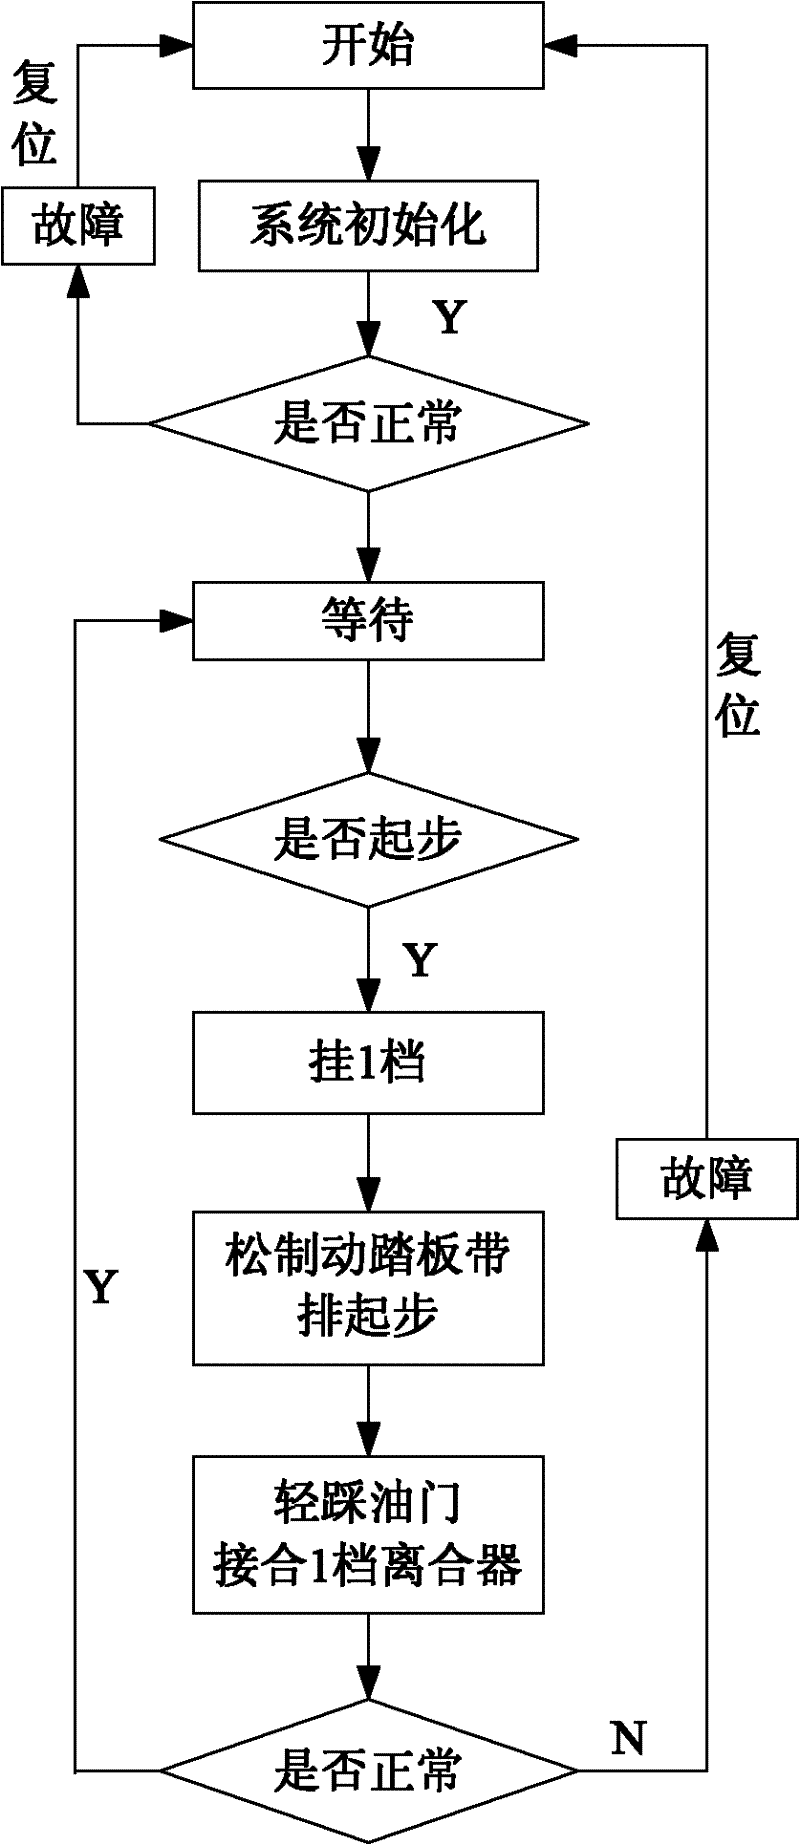 Double-clutch automatic transmission shift control method